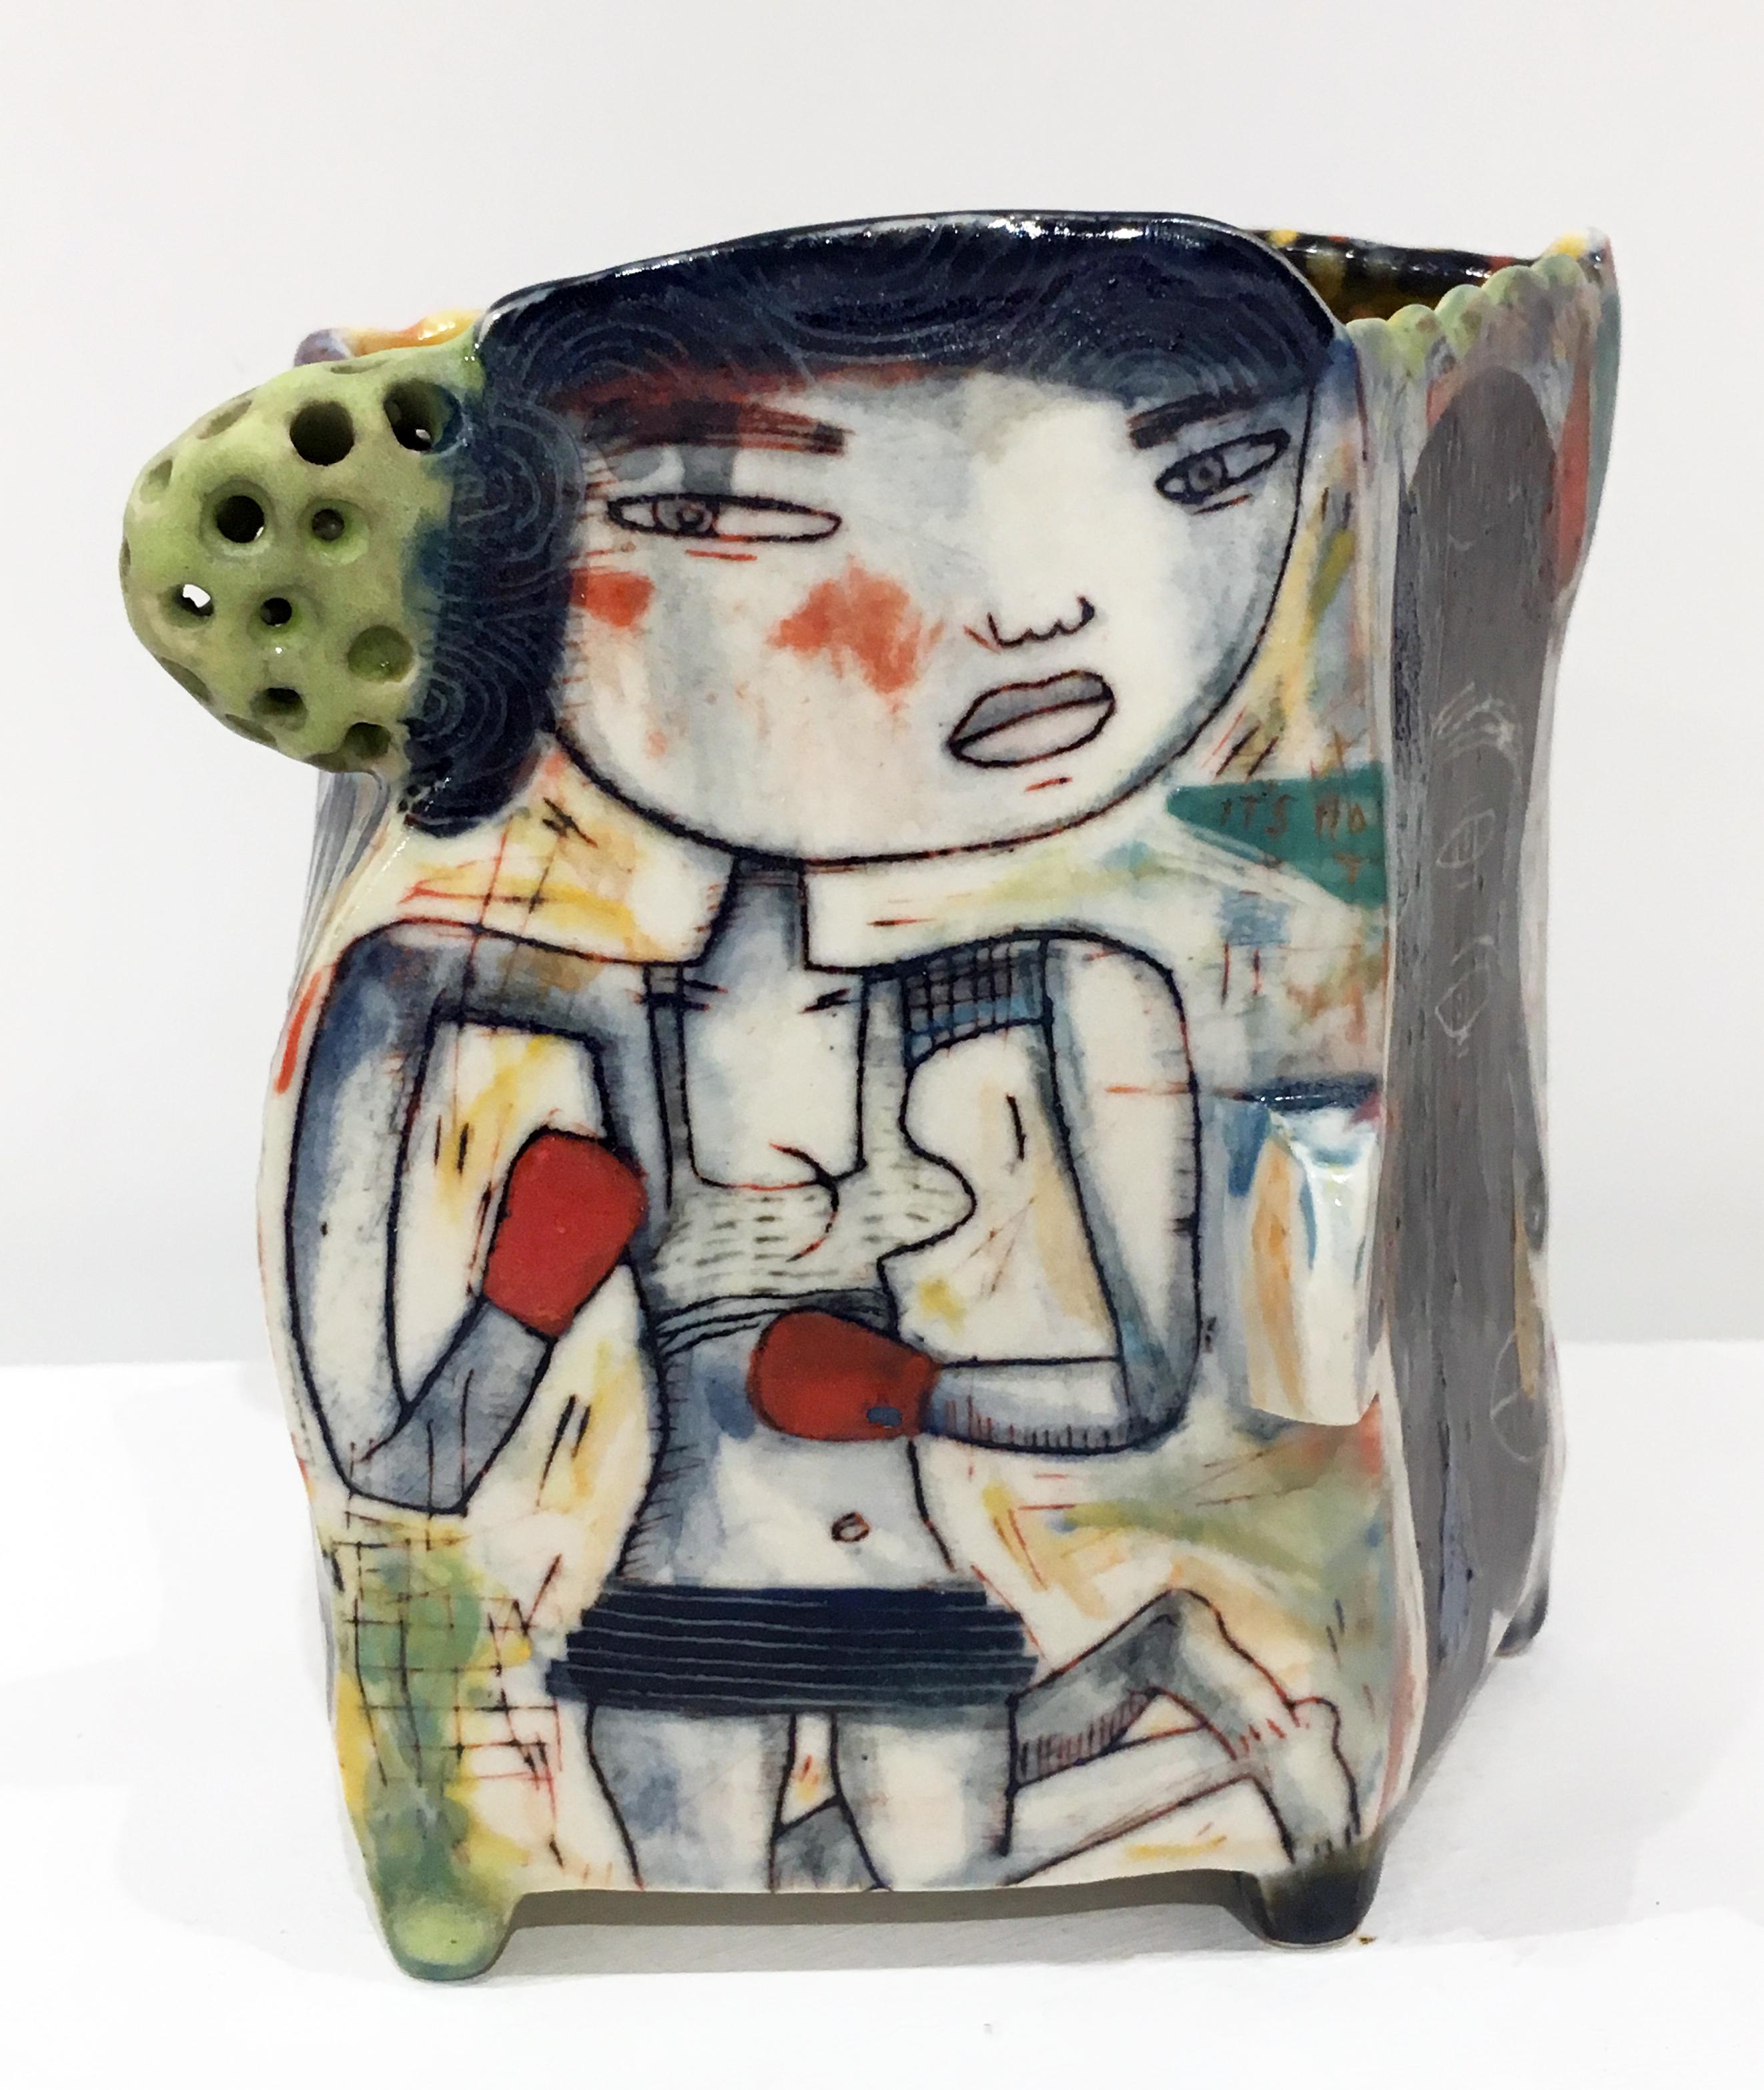 Kevin Snipes Abstract Sculpture - "Knuckle Sandwich" Porcelain Sculpture with Surface Illustration and Underglaze